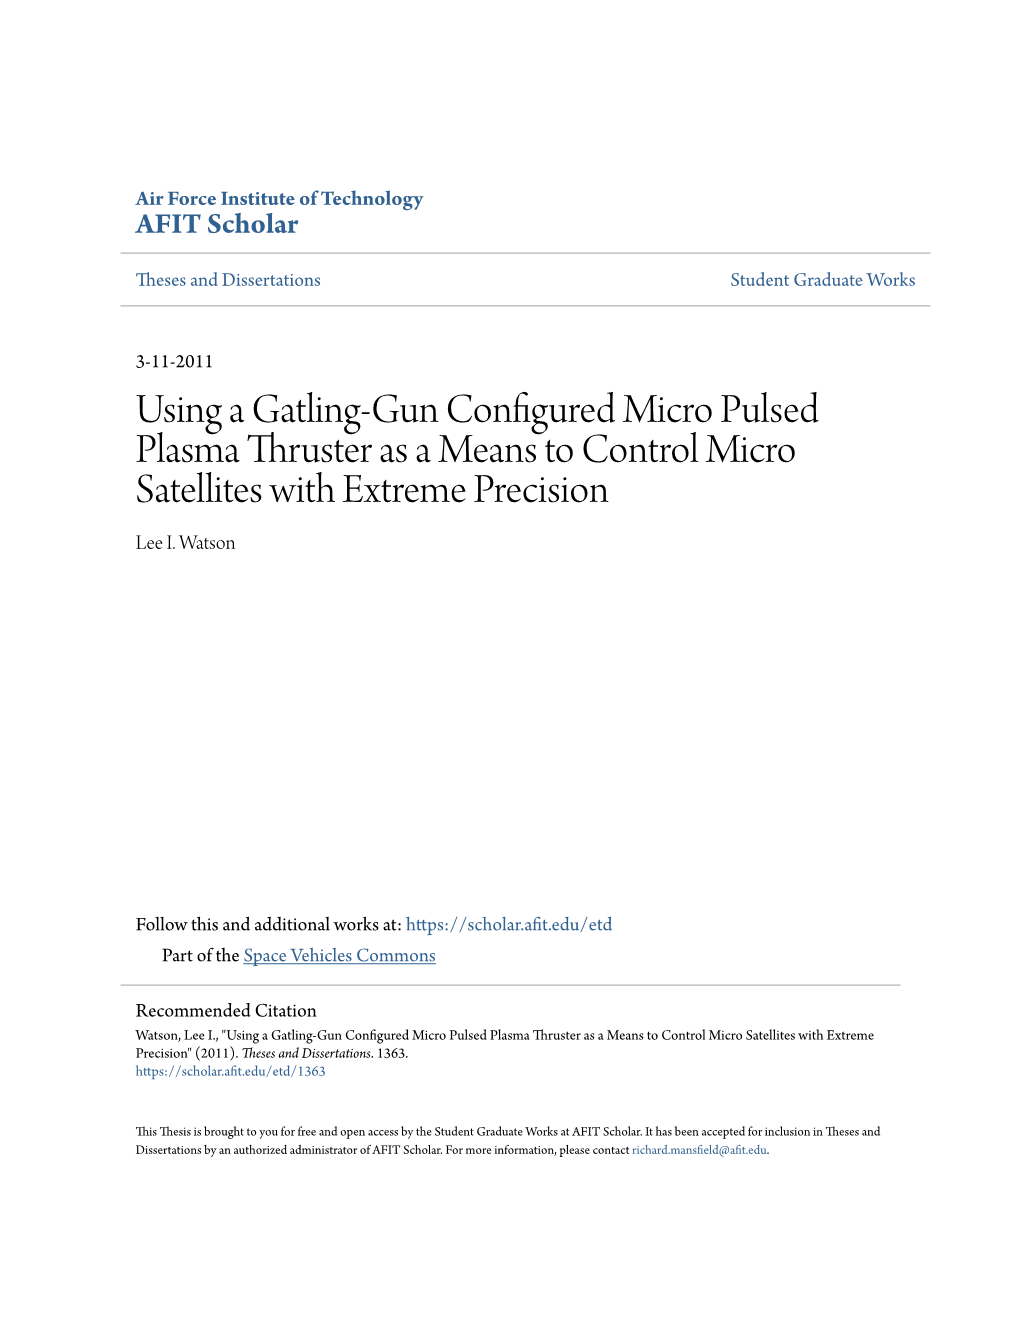 Using a Gatling-Gun Configured Micro Pulsed Plasma Thruster As a Means to Control Micro Satellites with Extreme Precision Lee I